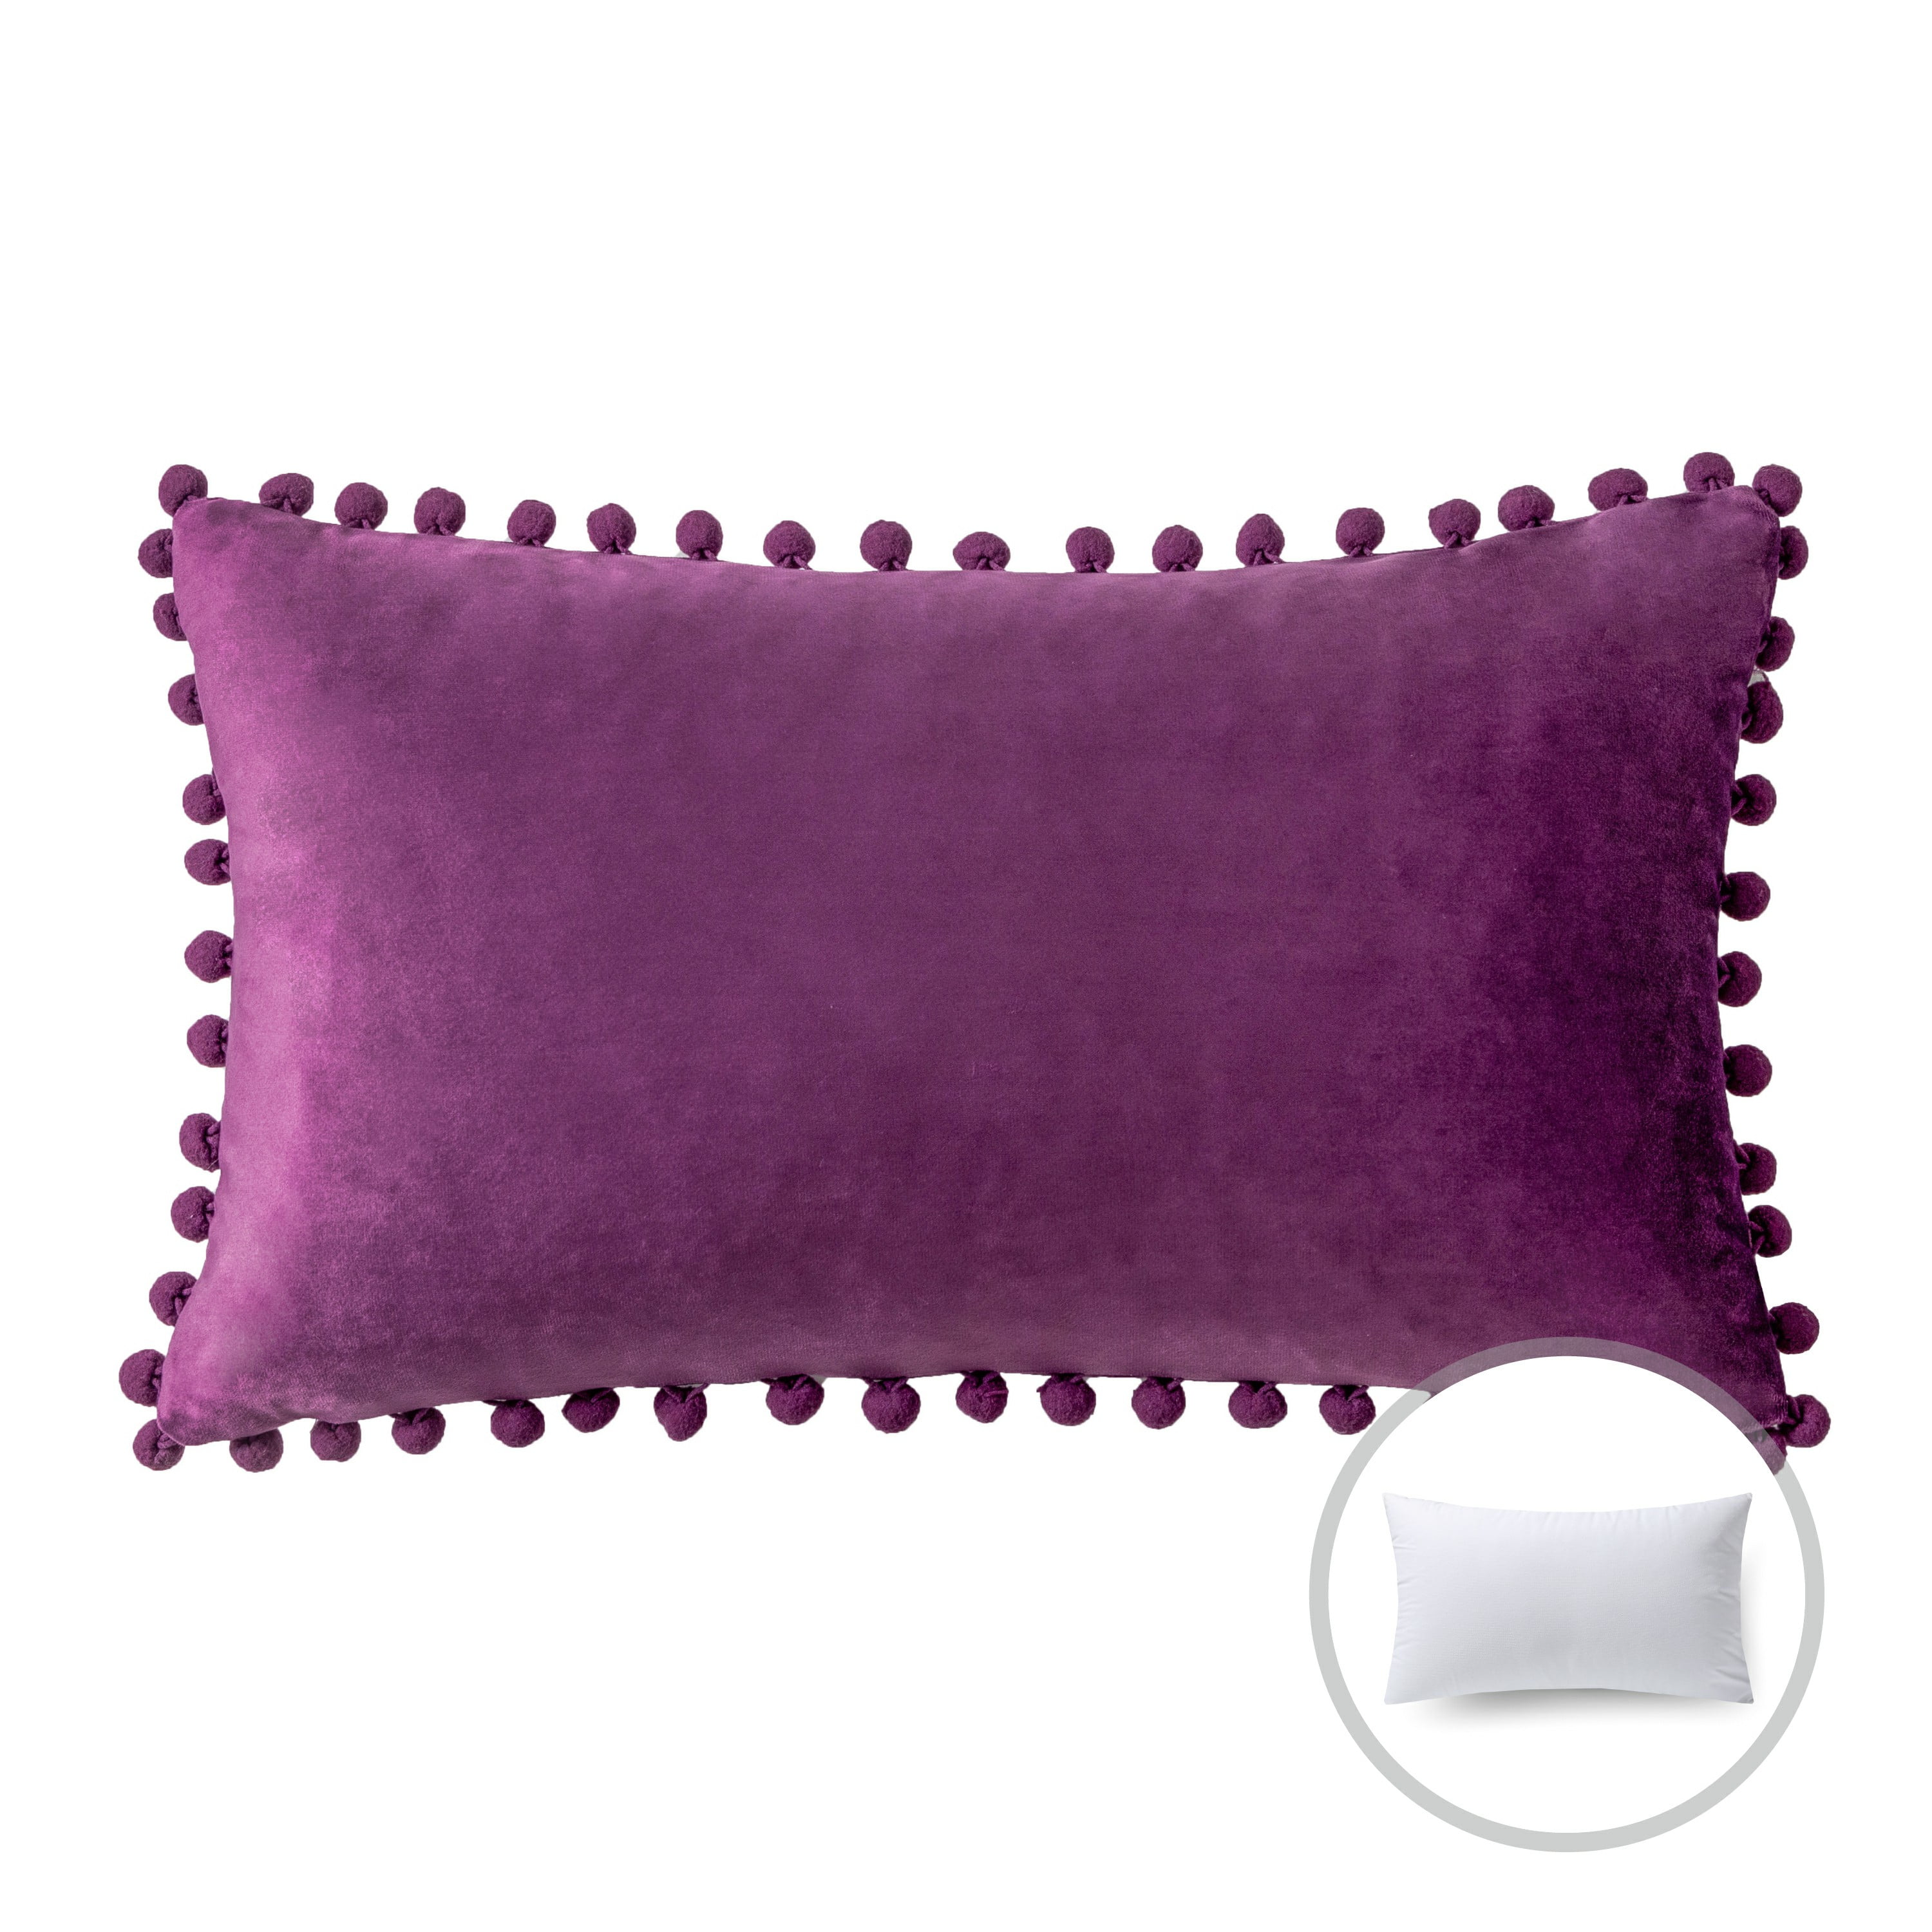 Cozy Quarters Inc Purple Velvet Feather and Down Filled Throw Pillows (Set of 2)